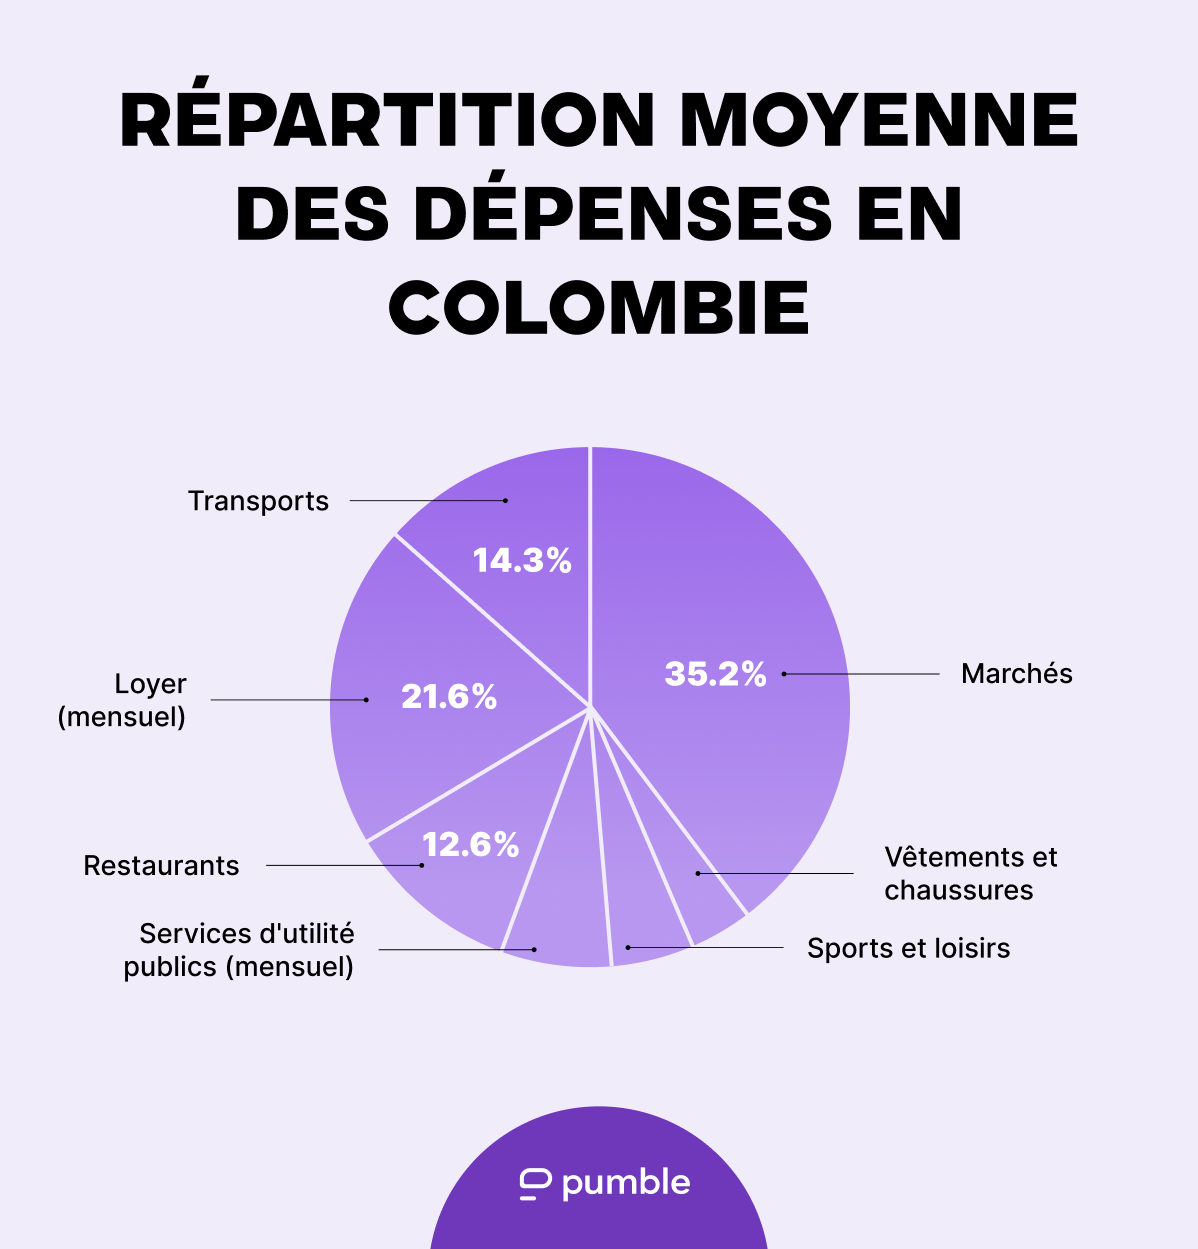 Average distribution of expenses in Colombia